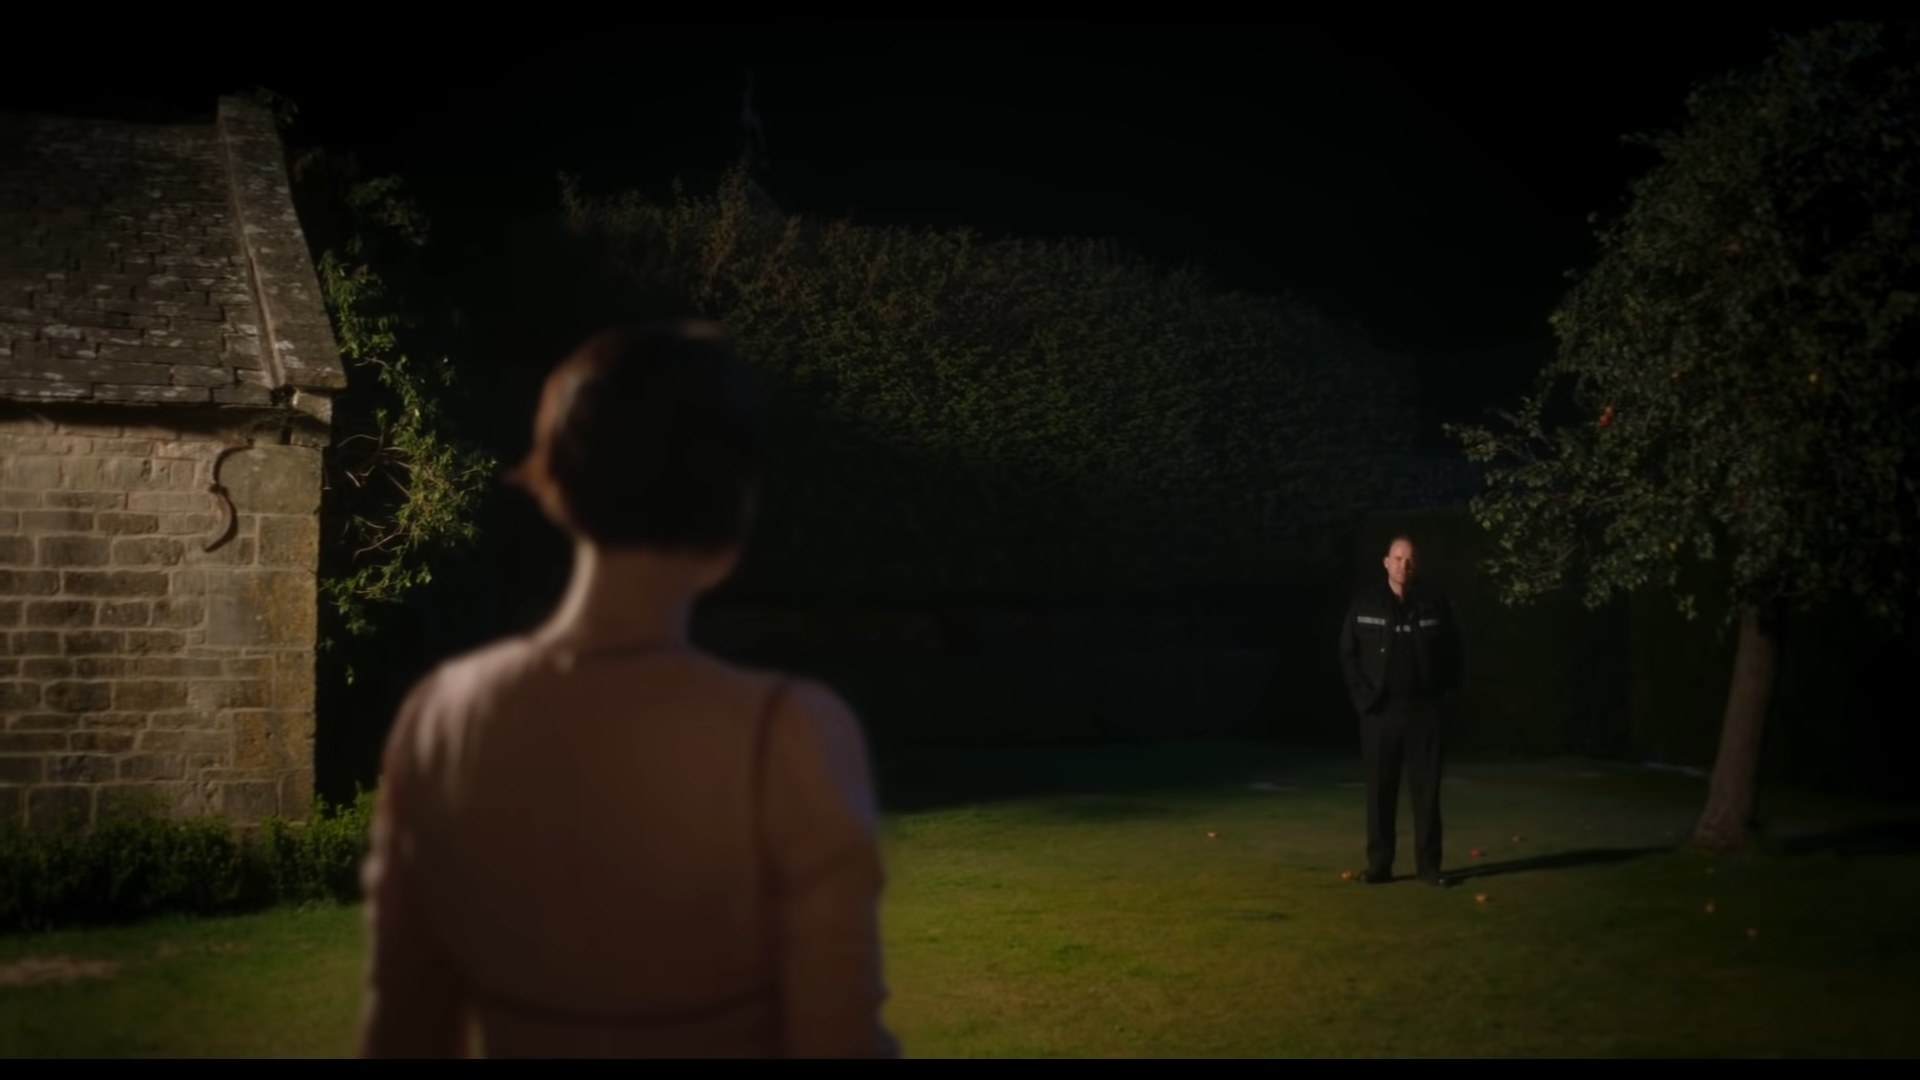 Harper looking at a police officer on her lawn in &quot;Men&quot;